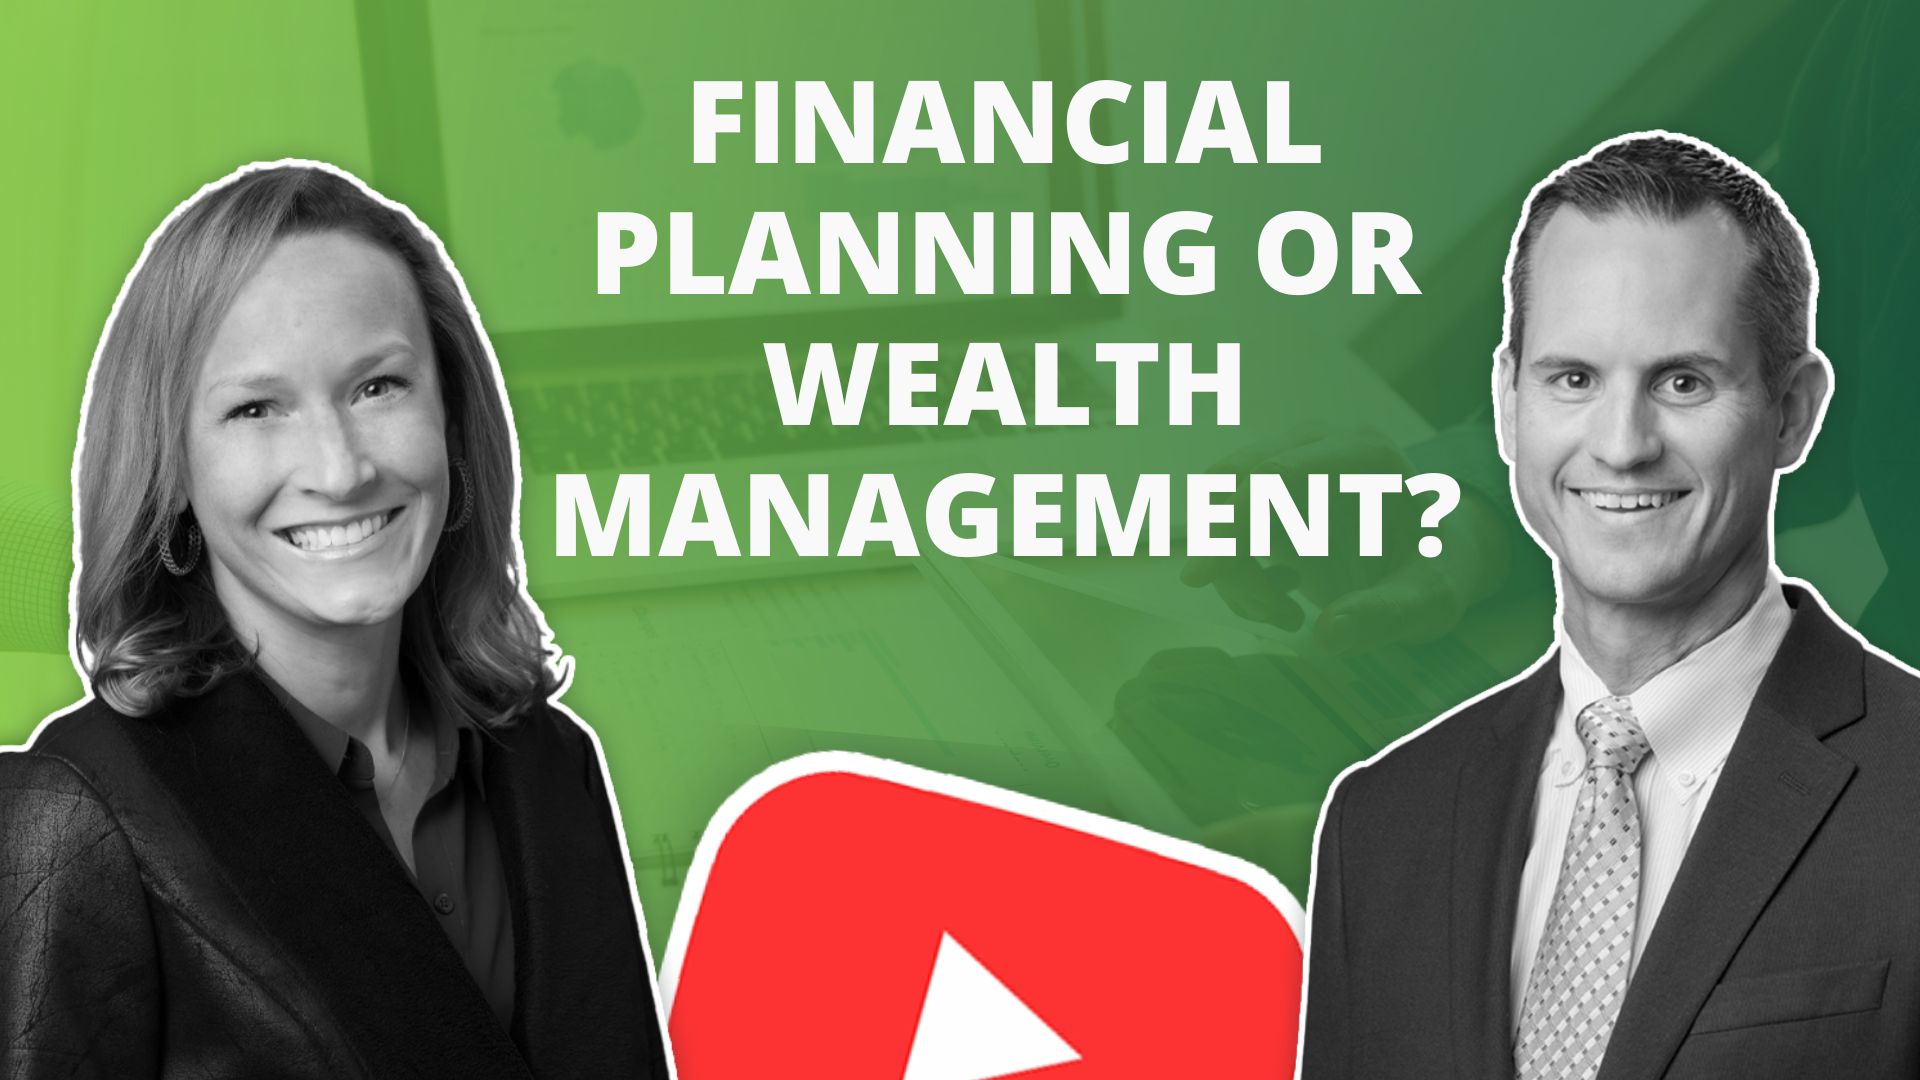 Financial planning or wealth management?